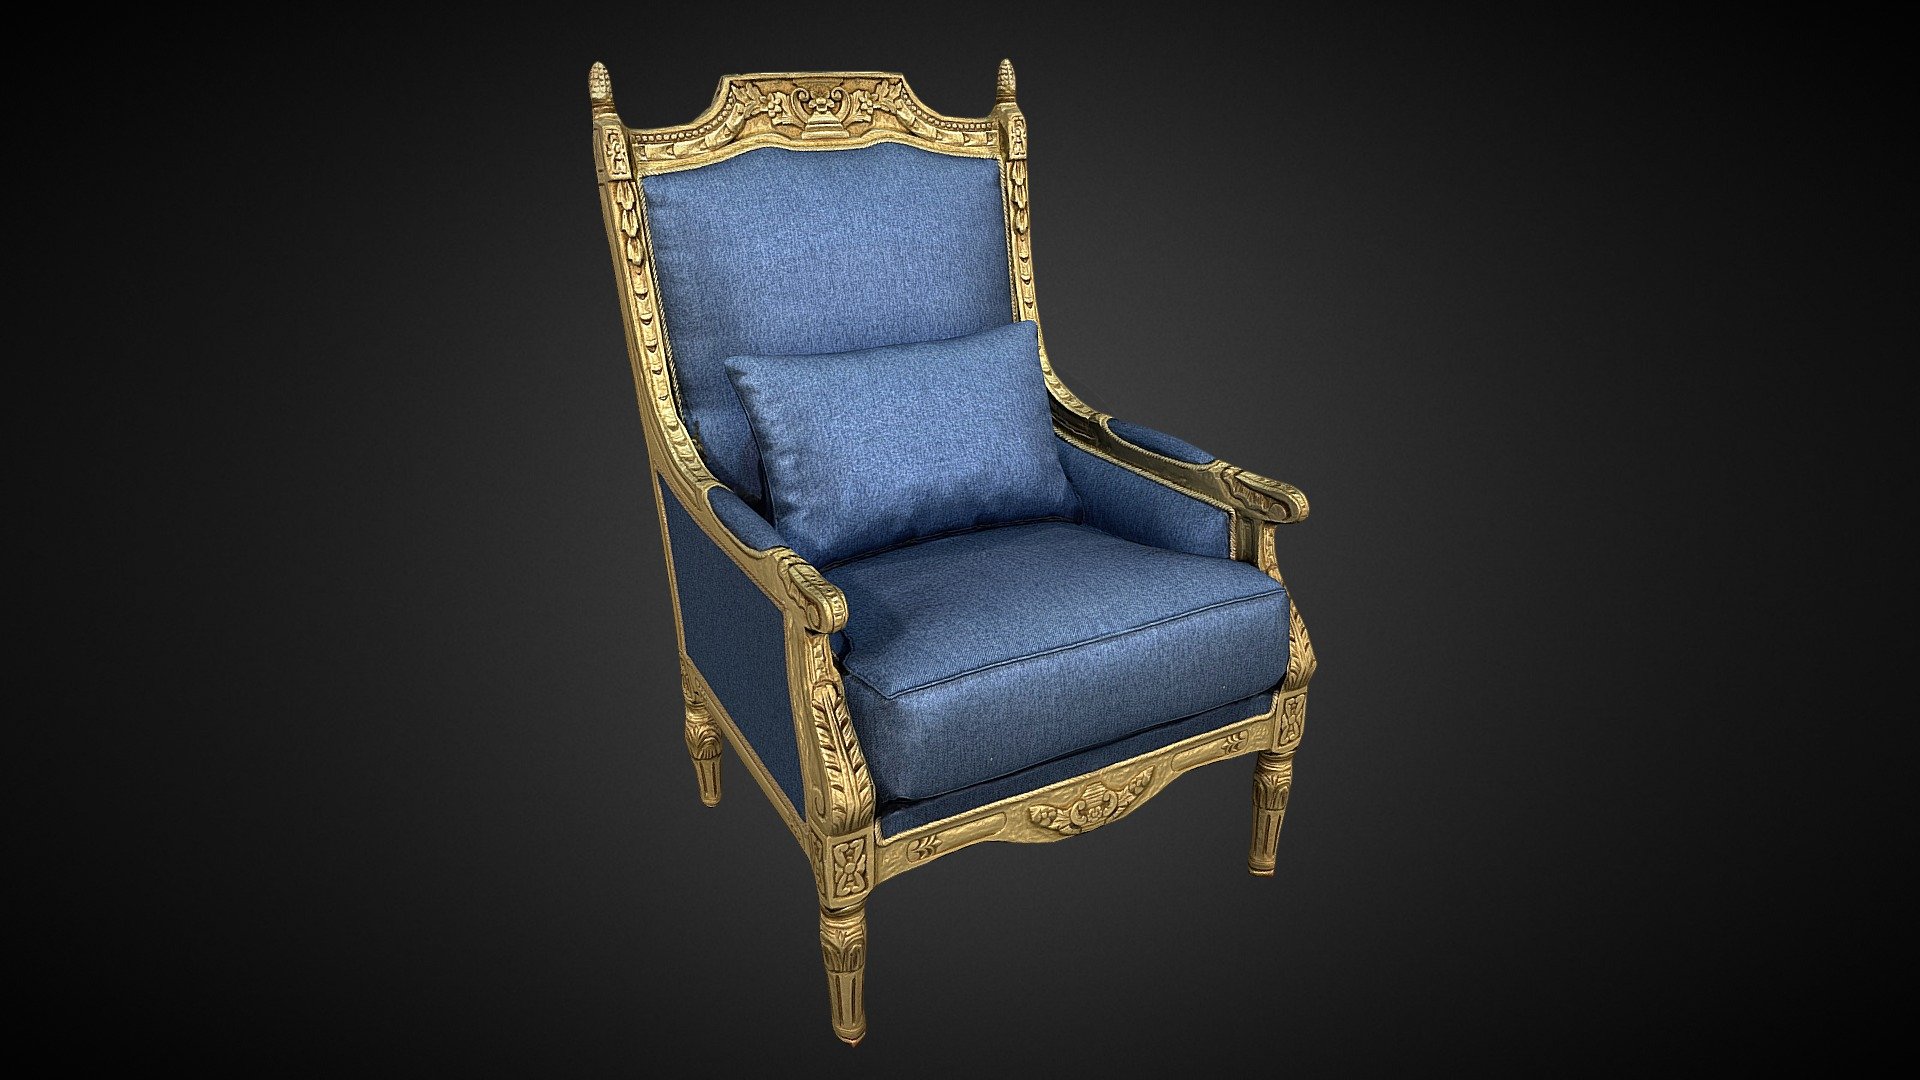 Low poly remake of ROYAL-RIC115 by Alhidba

https://sketchfab.com/3d-models/royal-ric115-0f5336151f474e60968b0dab9e70a0e4

900K to 11k

2 x 2048 textures - [REMAKE] - ROYAL-RIC115 - Buy Royalty Free 3D model by RaynaudL (@fts_ltx) 3d model